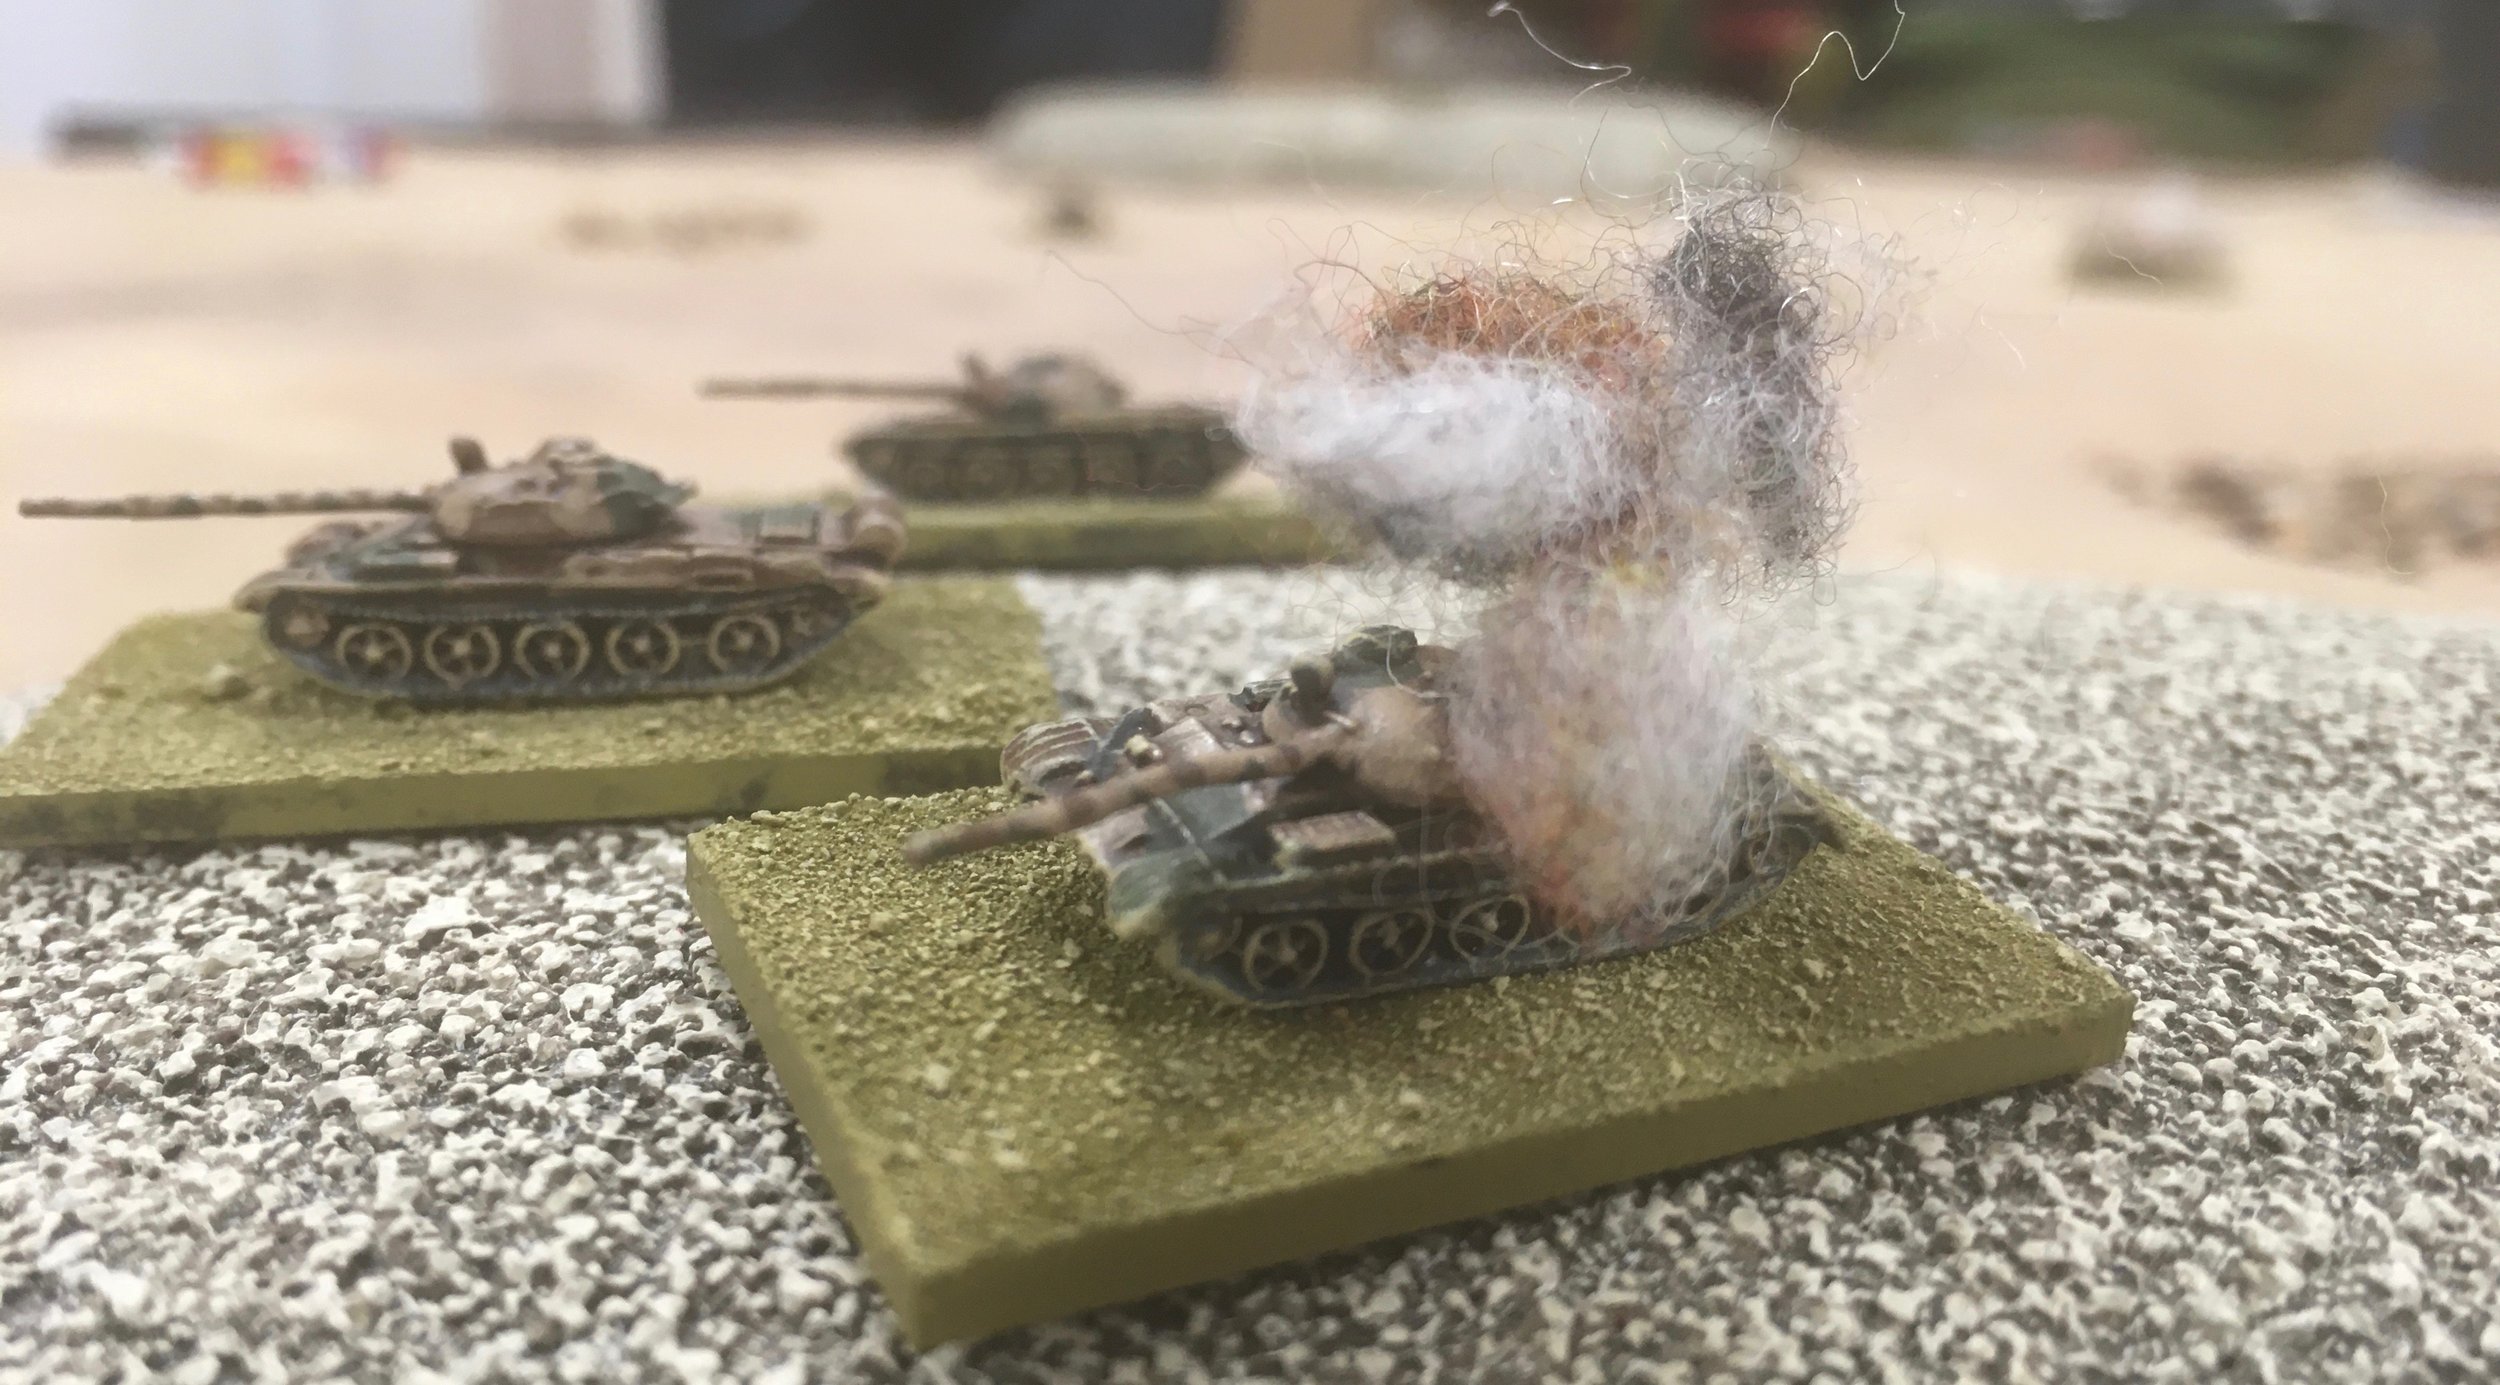 And slamming a round into the flank of one of the T-62's there.